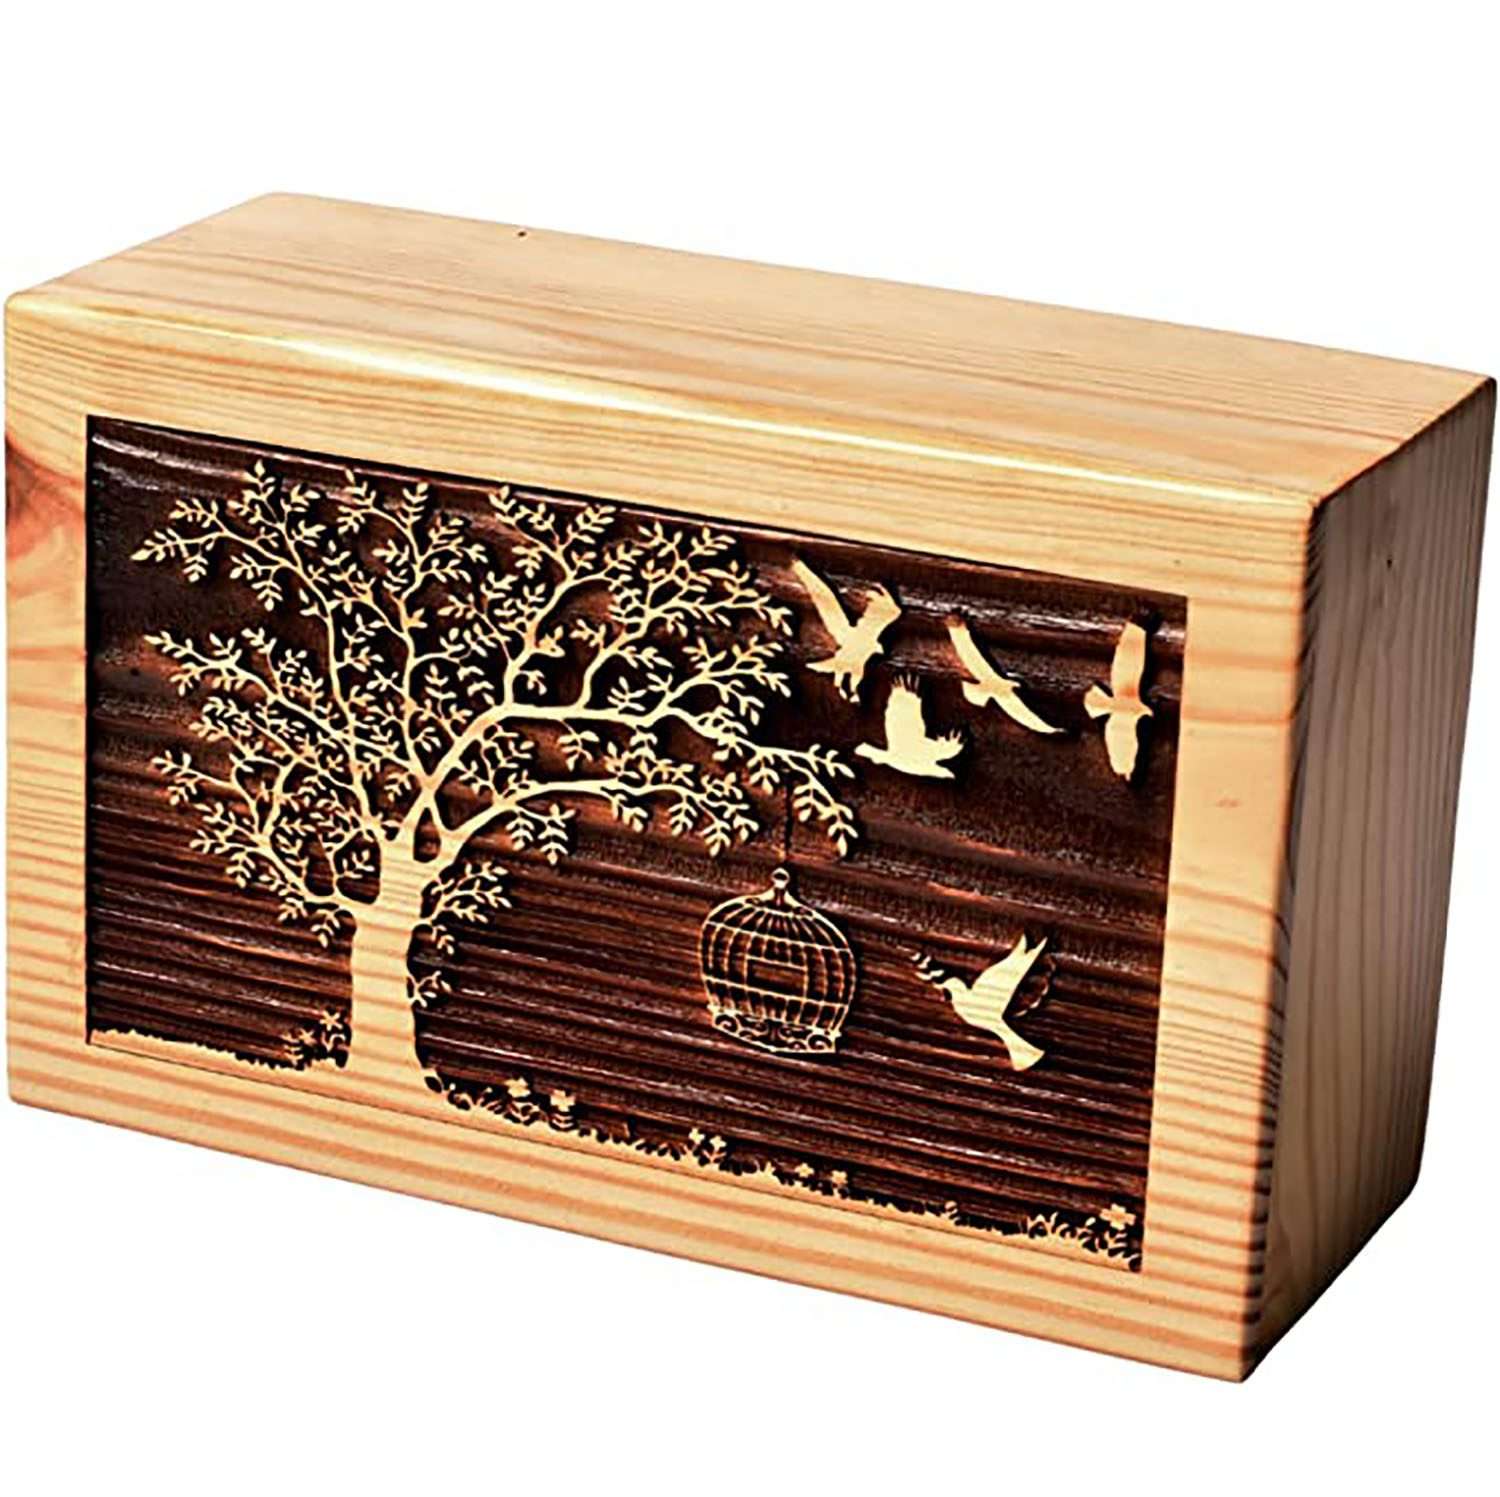 Hand carved Urn Wooden Box | Premium Wooden Box for Human ashes with beautiful design | Wood Urn Box manufacturer & supplier